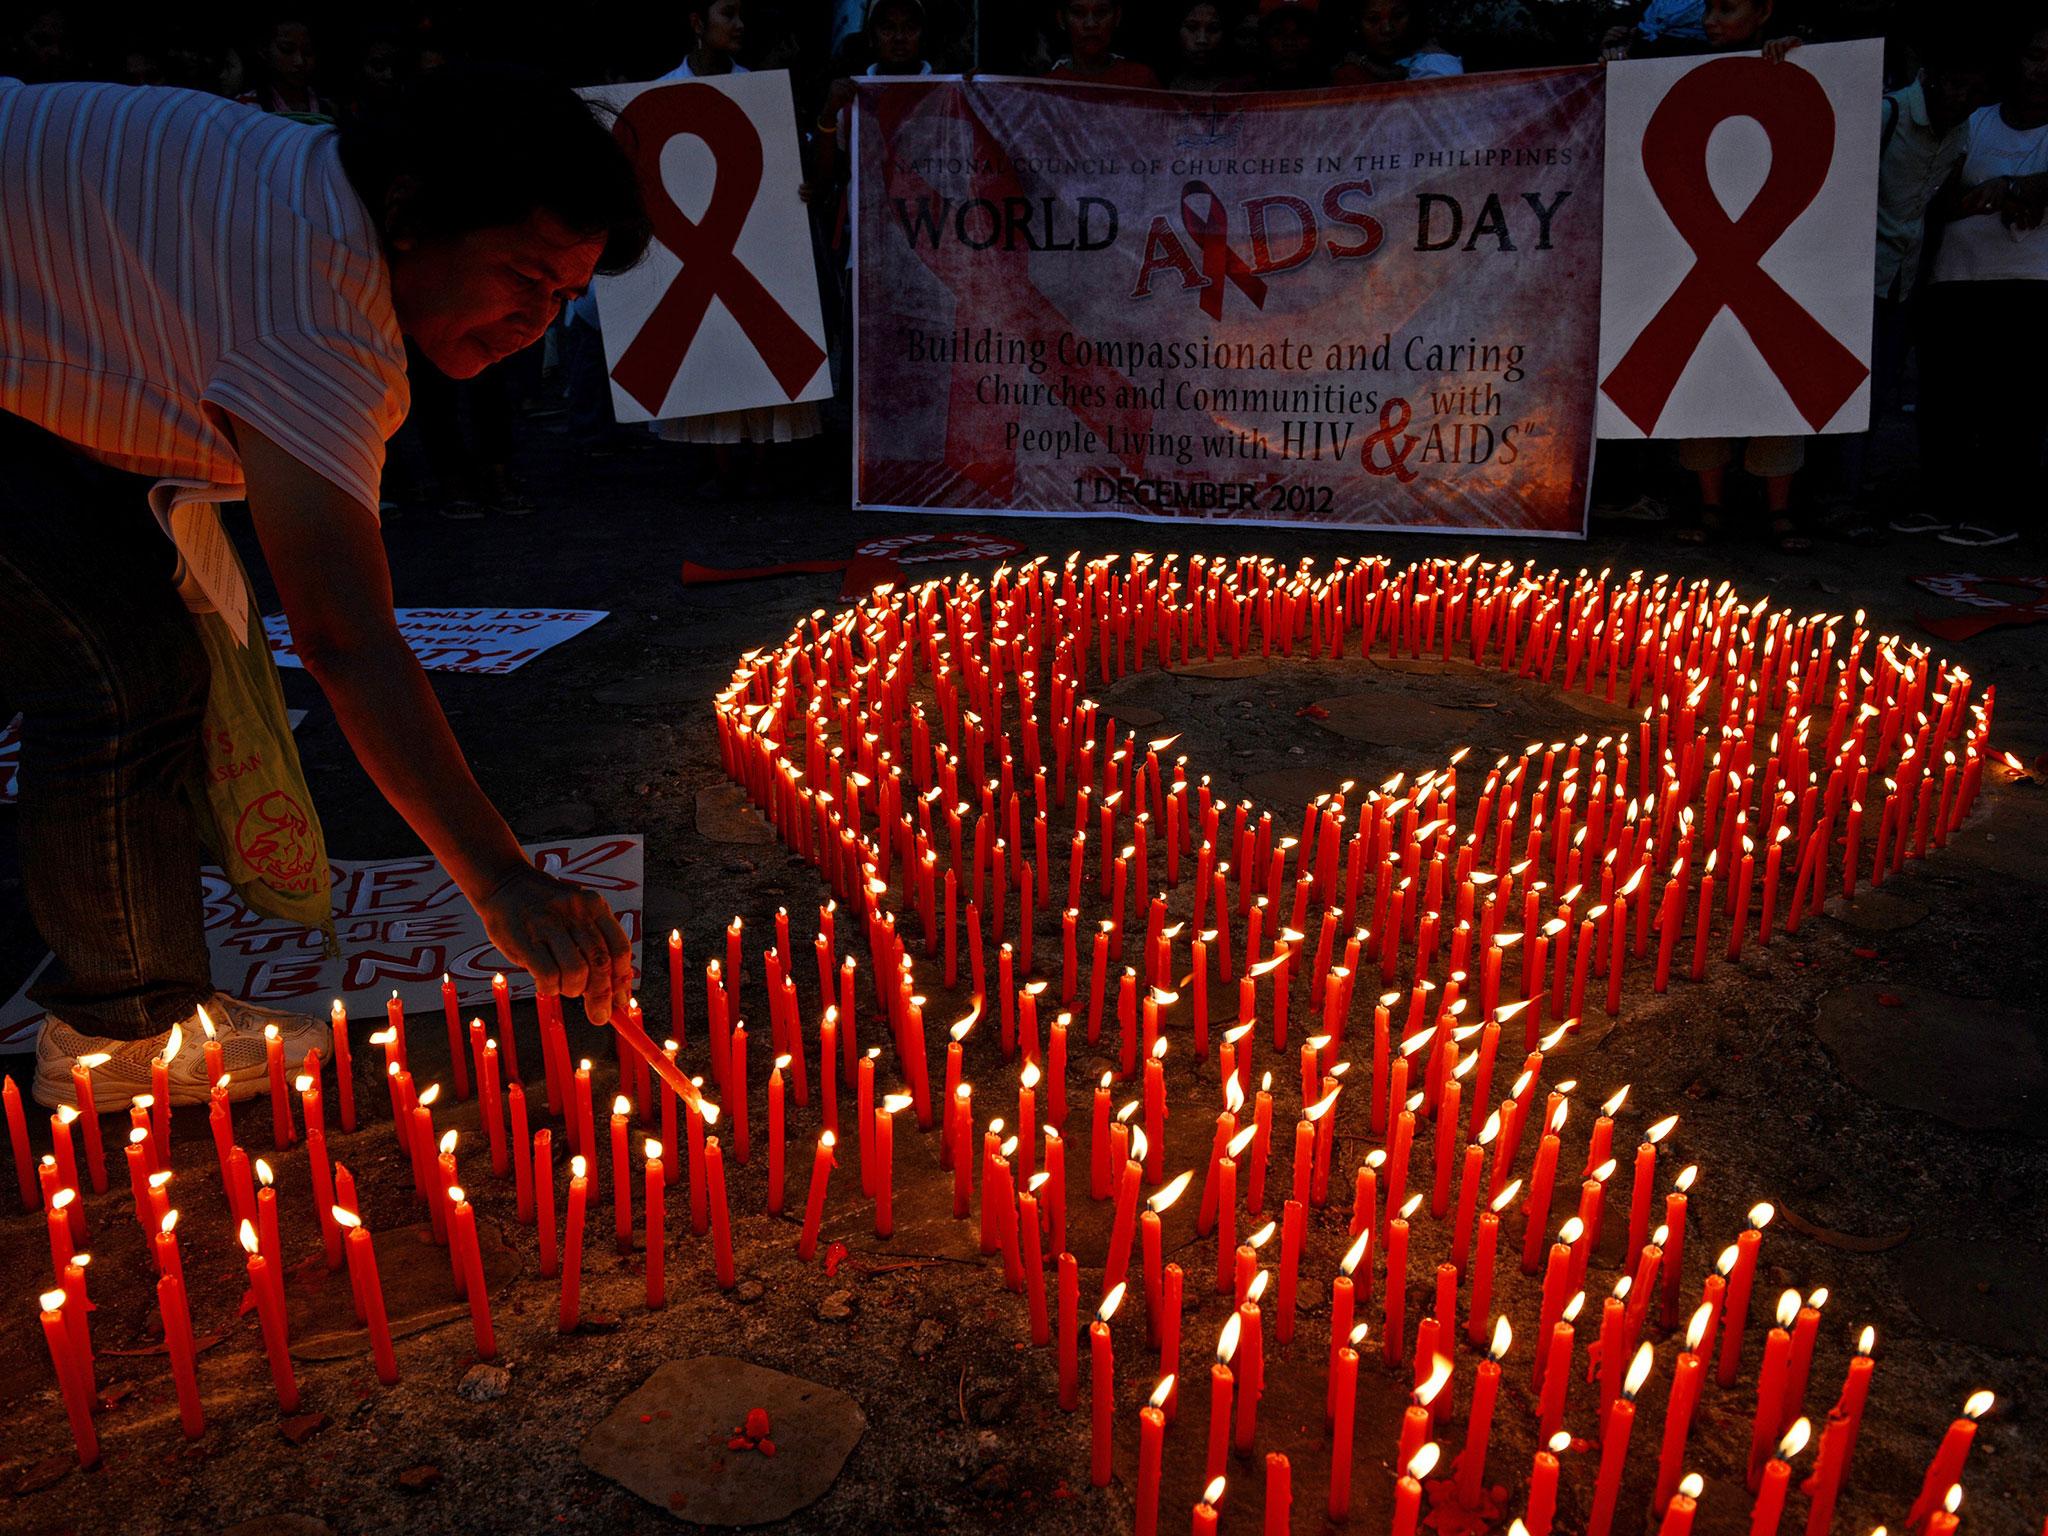 According to the report, HIV rates in gay communities are still on the rise